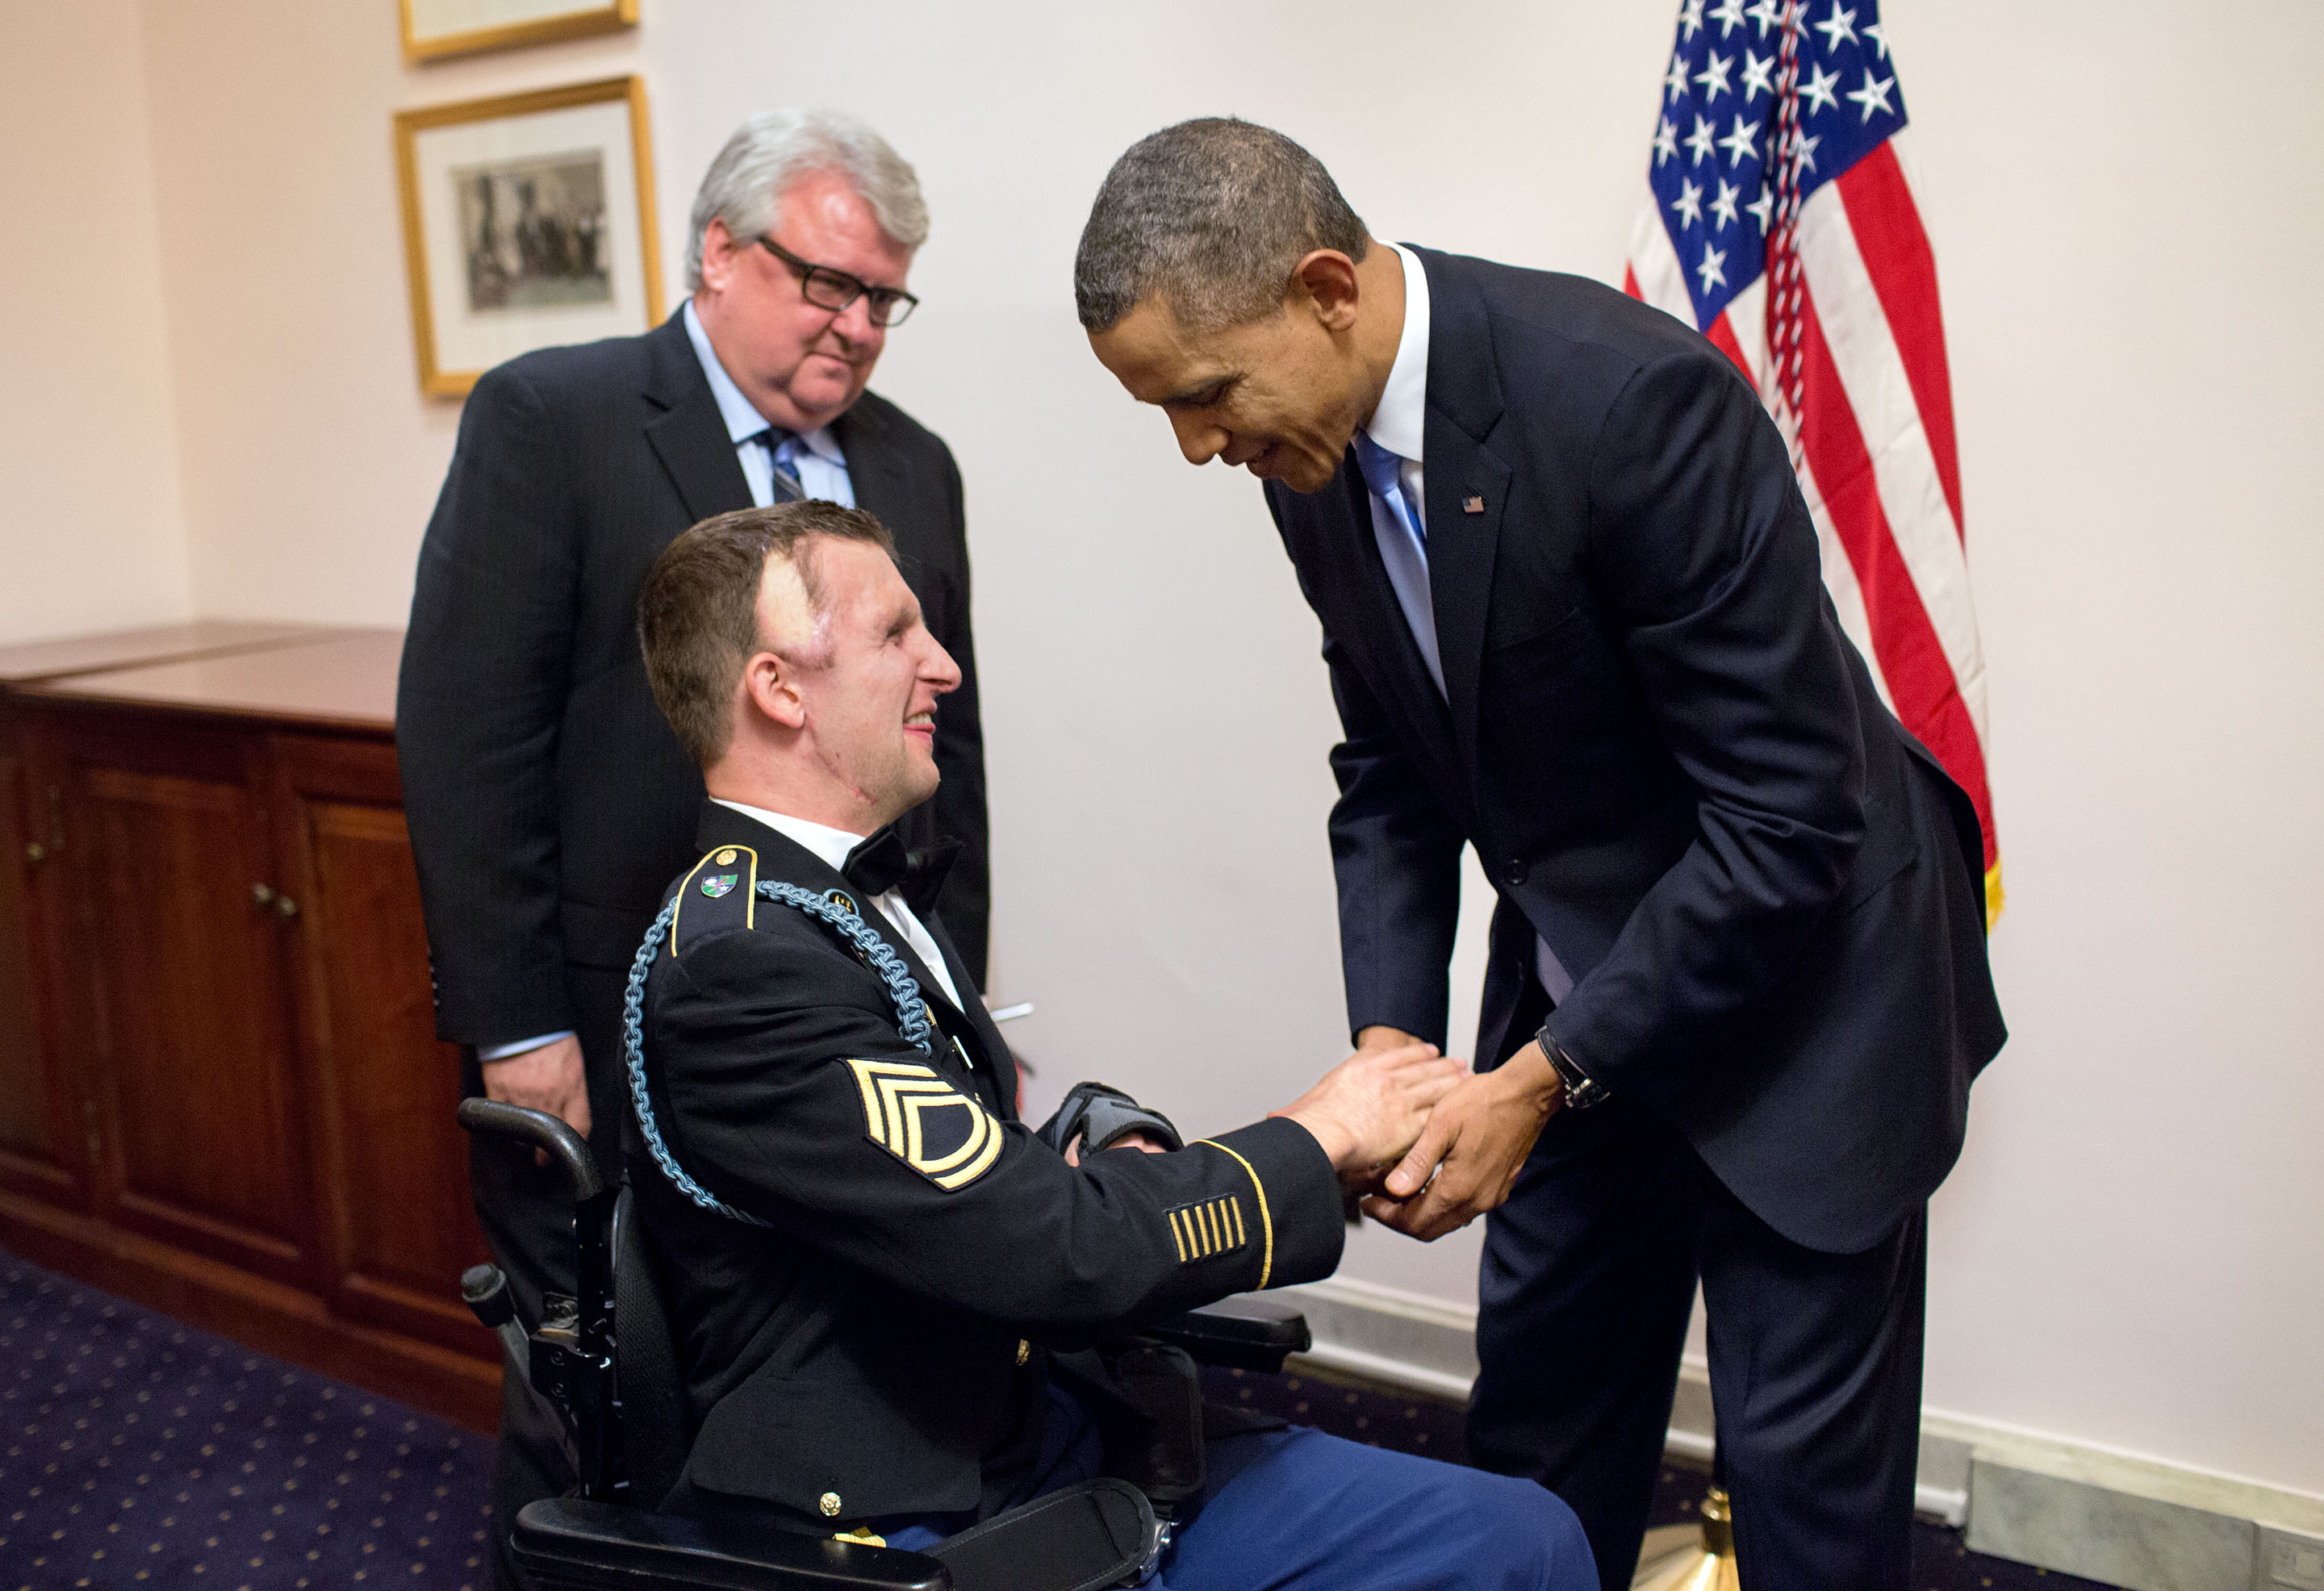 Jan. 28, 2014: Cory, with his father Craig, gives a Ranger Challenge Coin to the President following his State of the Union address. (Official White House Photo by Pete Souza)